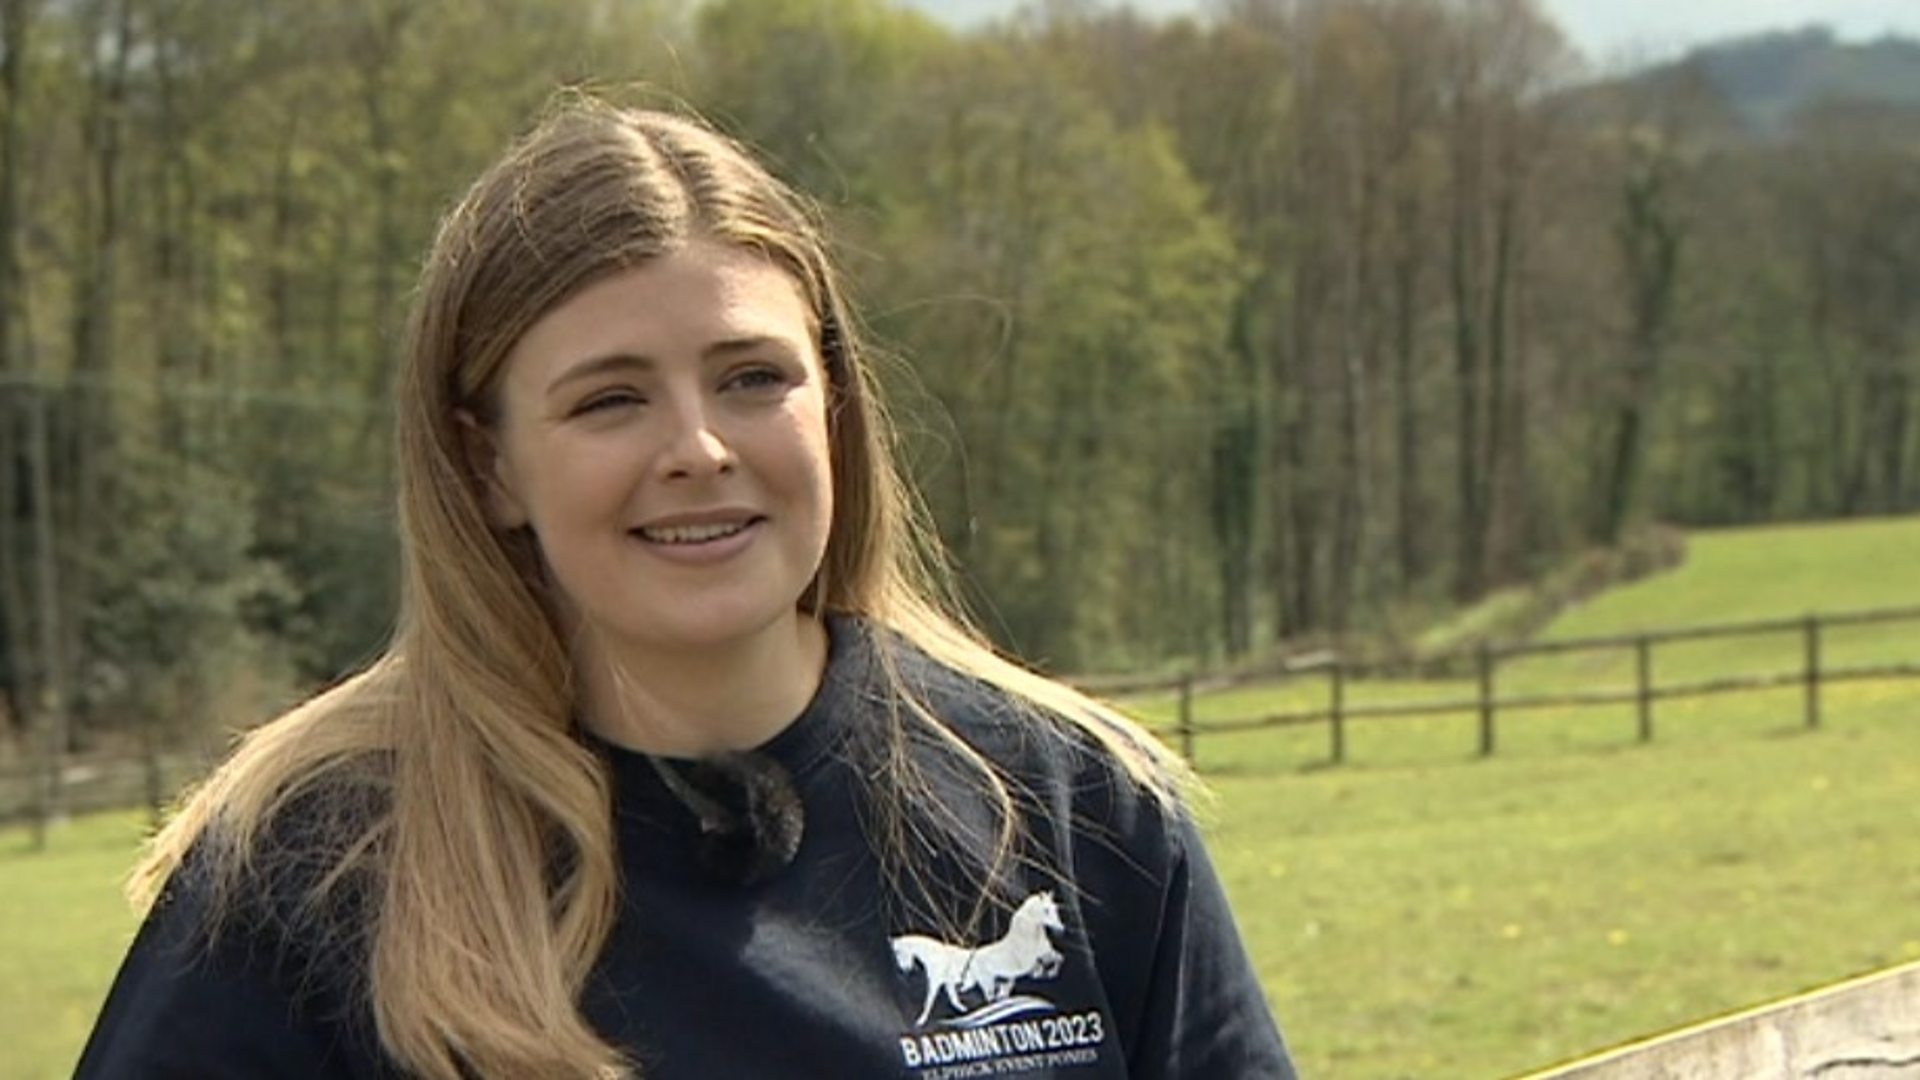 Amateur rider and influencer to achieve Badminton Horse Trial dream